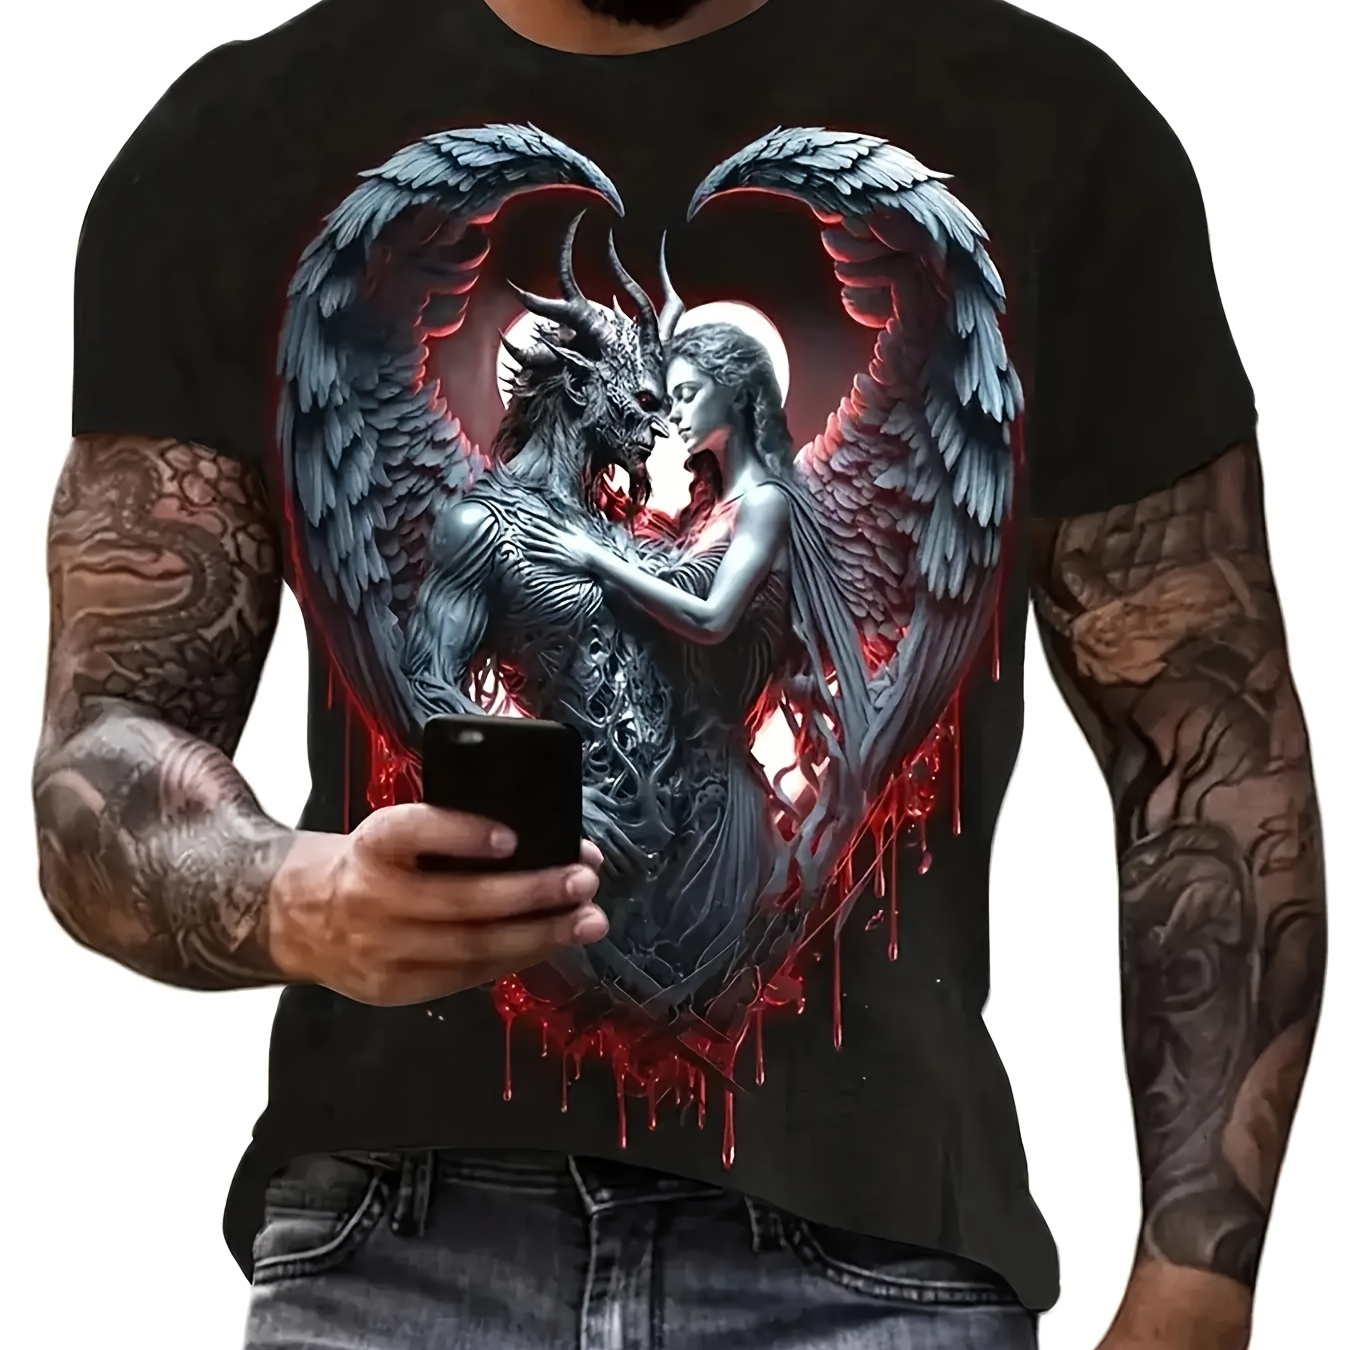 

Skull And Winged Beauty 3d Graphic Print Men's Novelty Short Sleeve Crew Neck T-shirt, Summer Outdoor